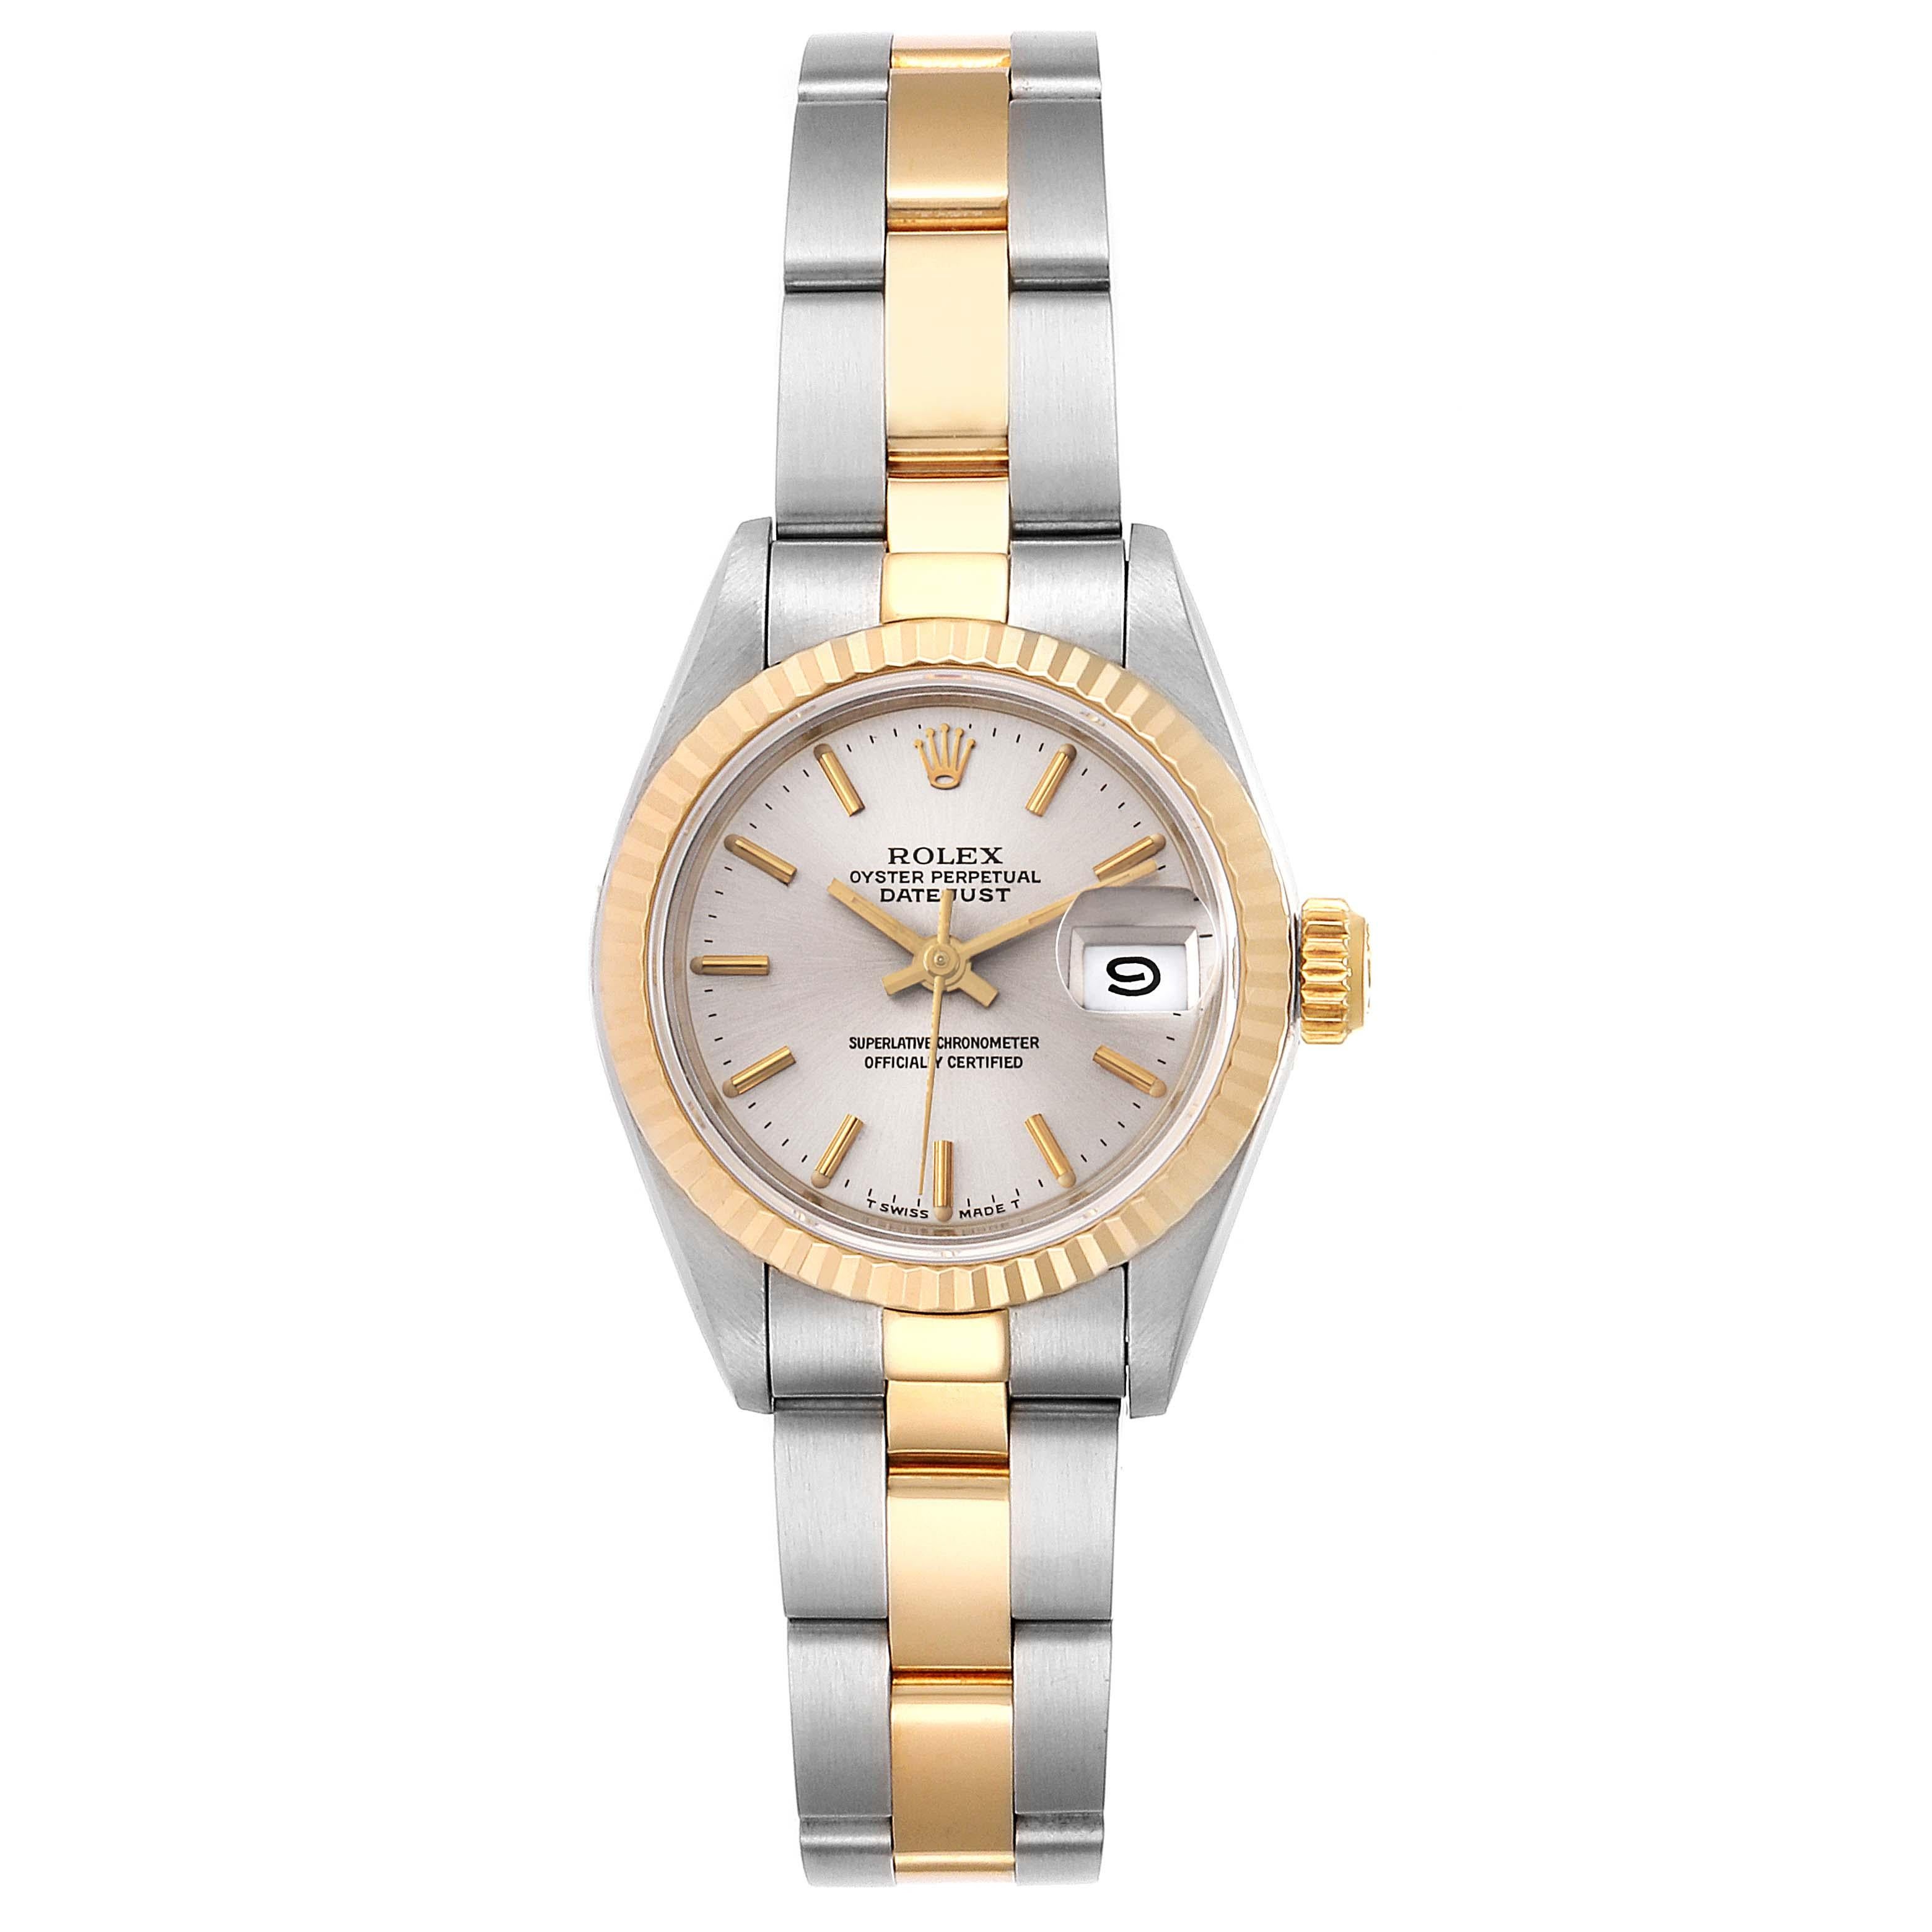 Rolex Datejust Steel Yellow Gold Silver Dial Ladies Watch 69173. Officially certified chronometer self-winding movement. Stainless steel oyster case 26 mm in diameter. Rolex logo on a crown. 18k yellow gold fluted bezel. Scratch resistant sapphire